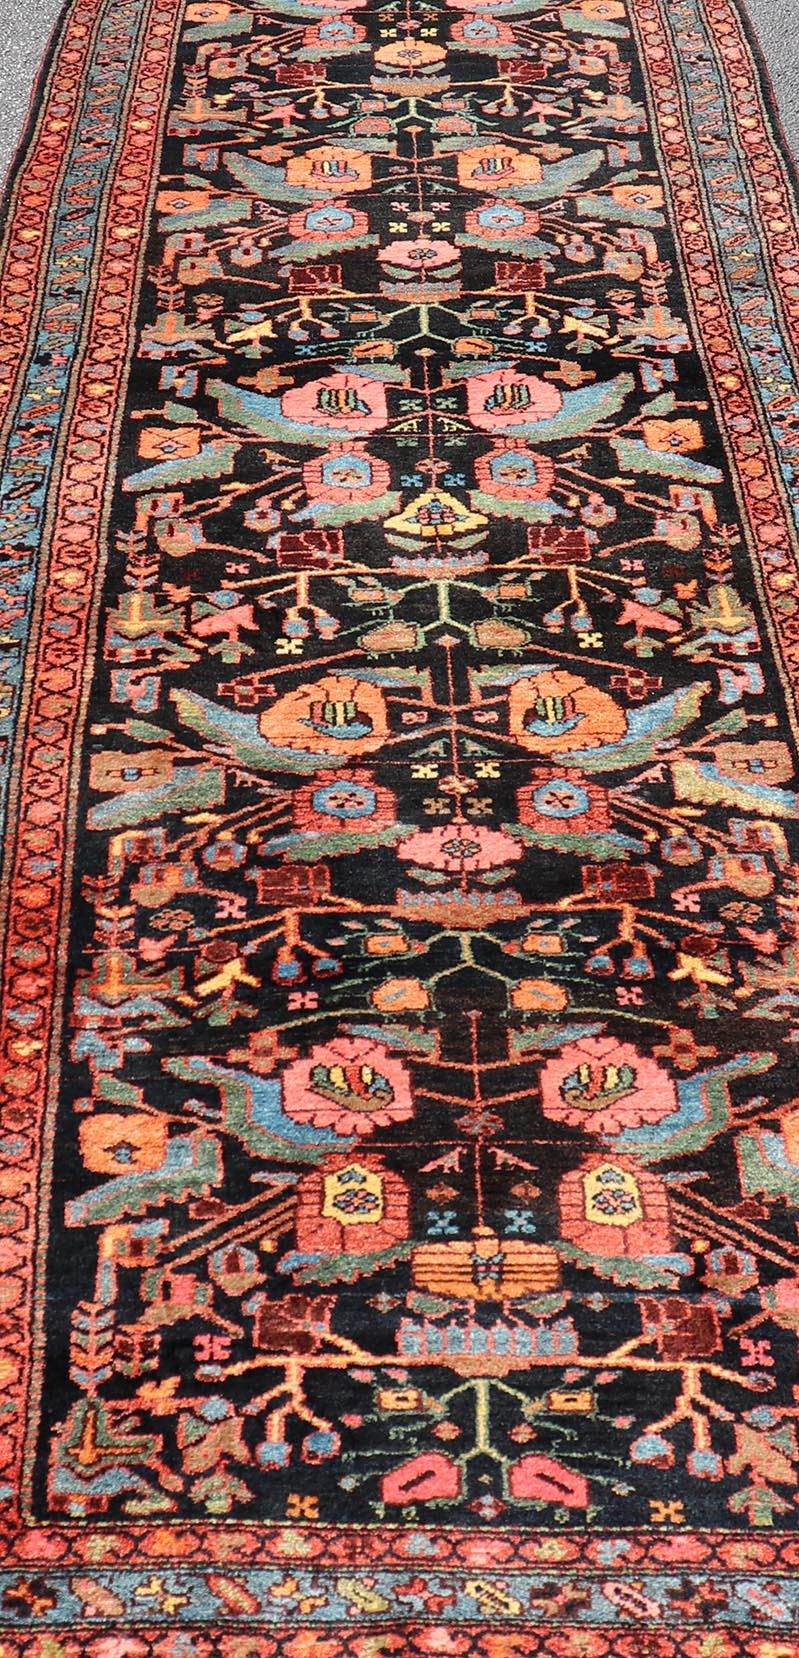 Antique Persain Nahavand Gallery Runner with All-Over Sub-Geometric Design. Keivan Woven Arts / rug X23-0817-339, country of origin / type: Persian / Nahavand, circa Early-20th Century.
Measures: 4'2 x 12'8 
This absolutely stunning Antique Nahavand